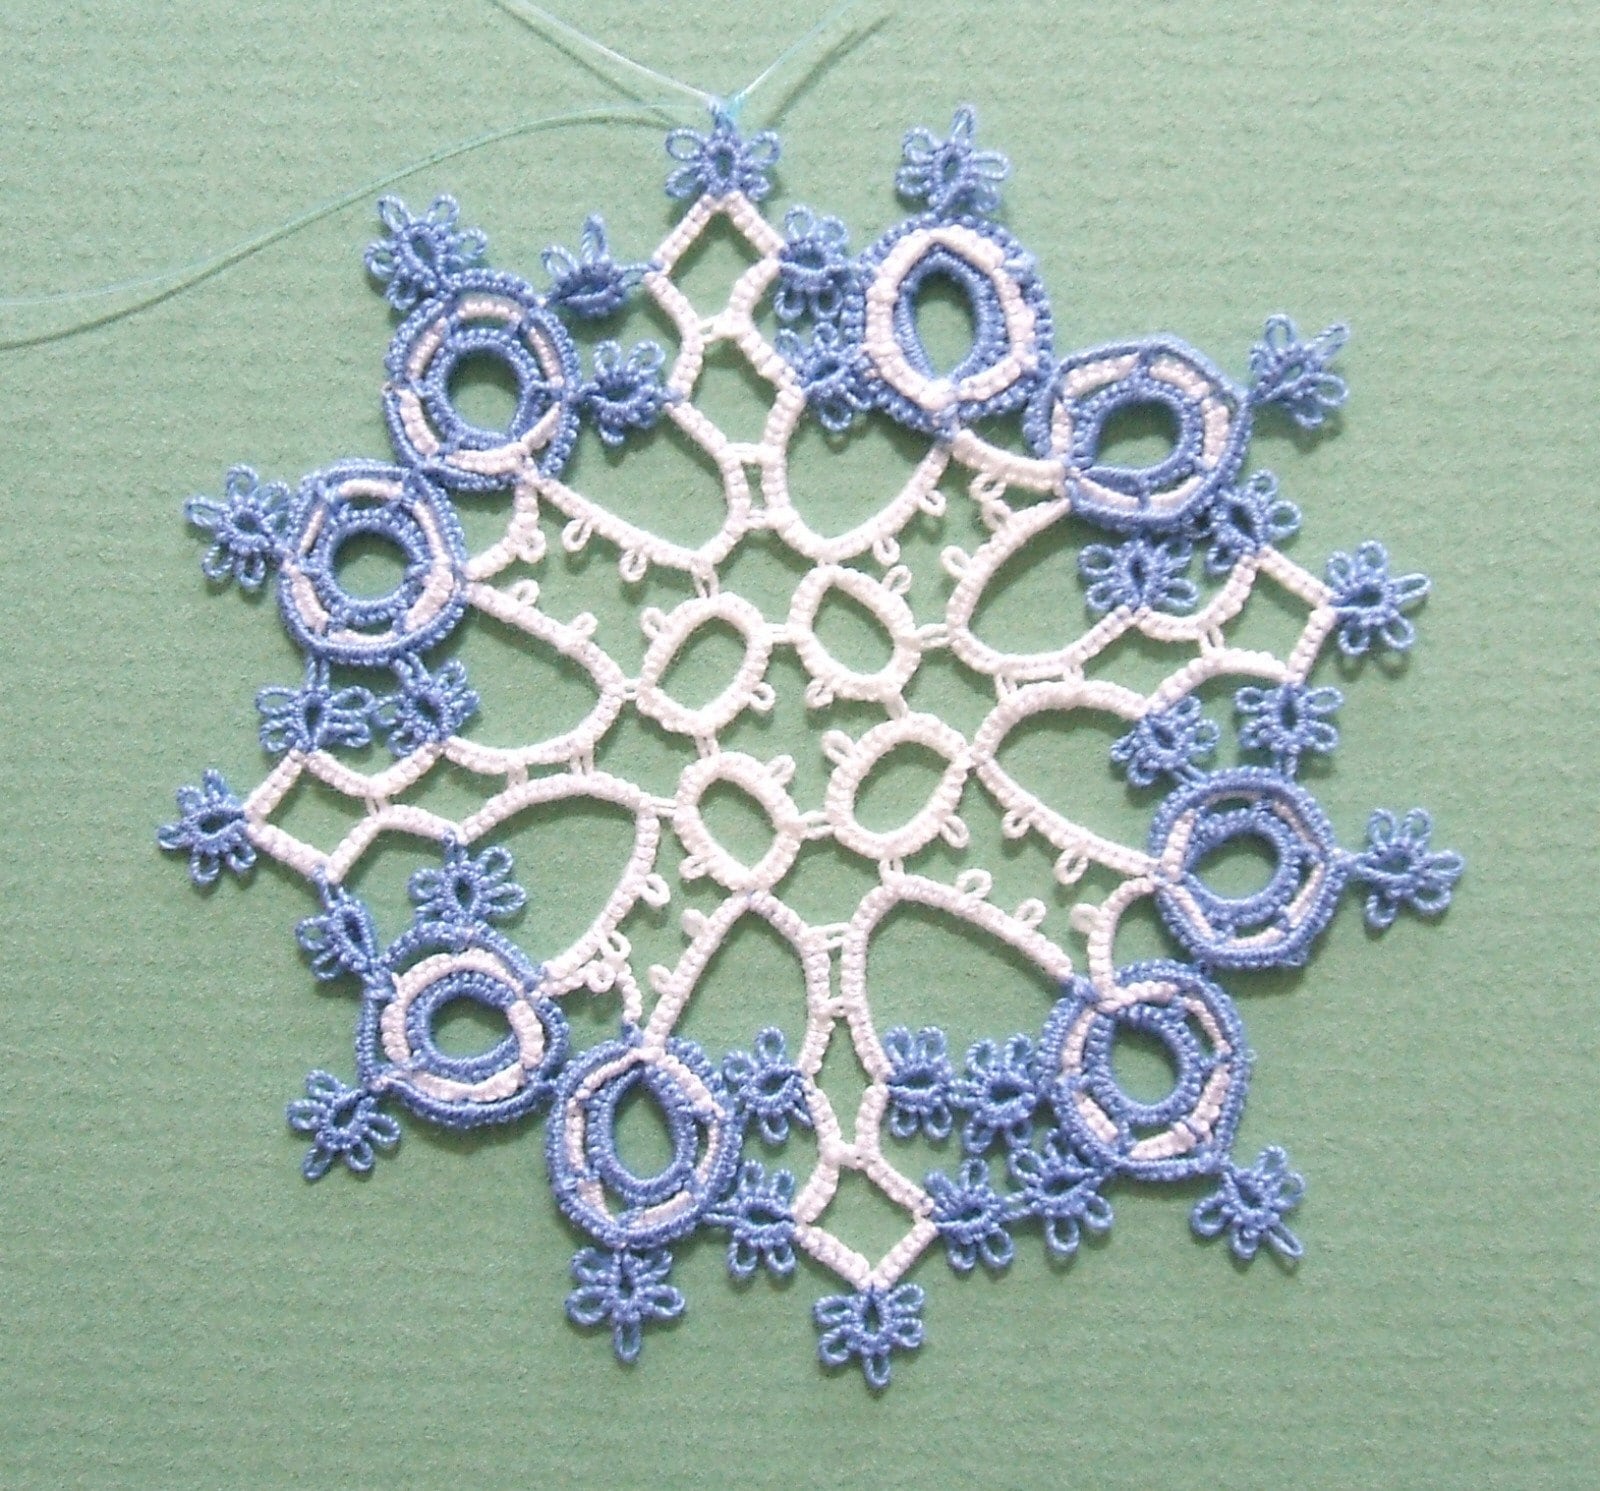 Free tatting patterns - by Craft Gossip - Today&apos;s top blogs on